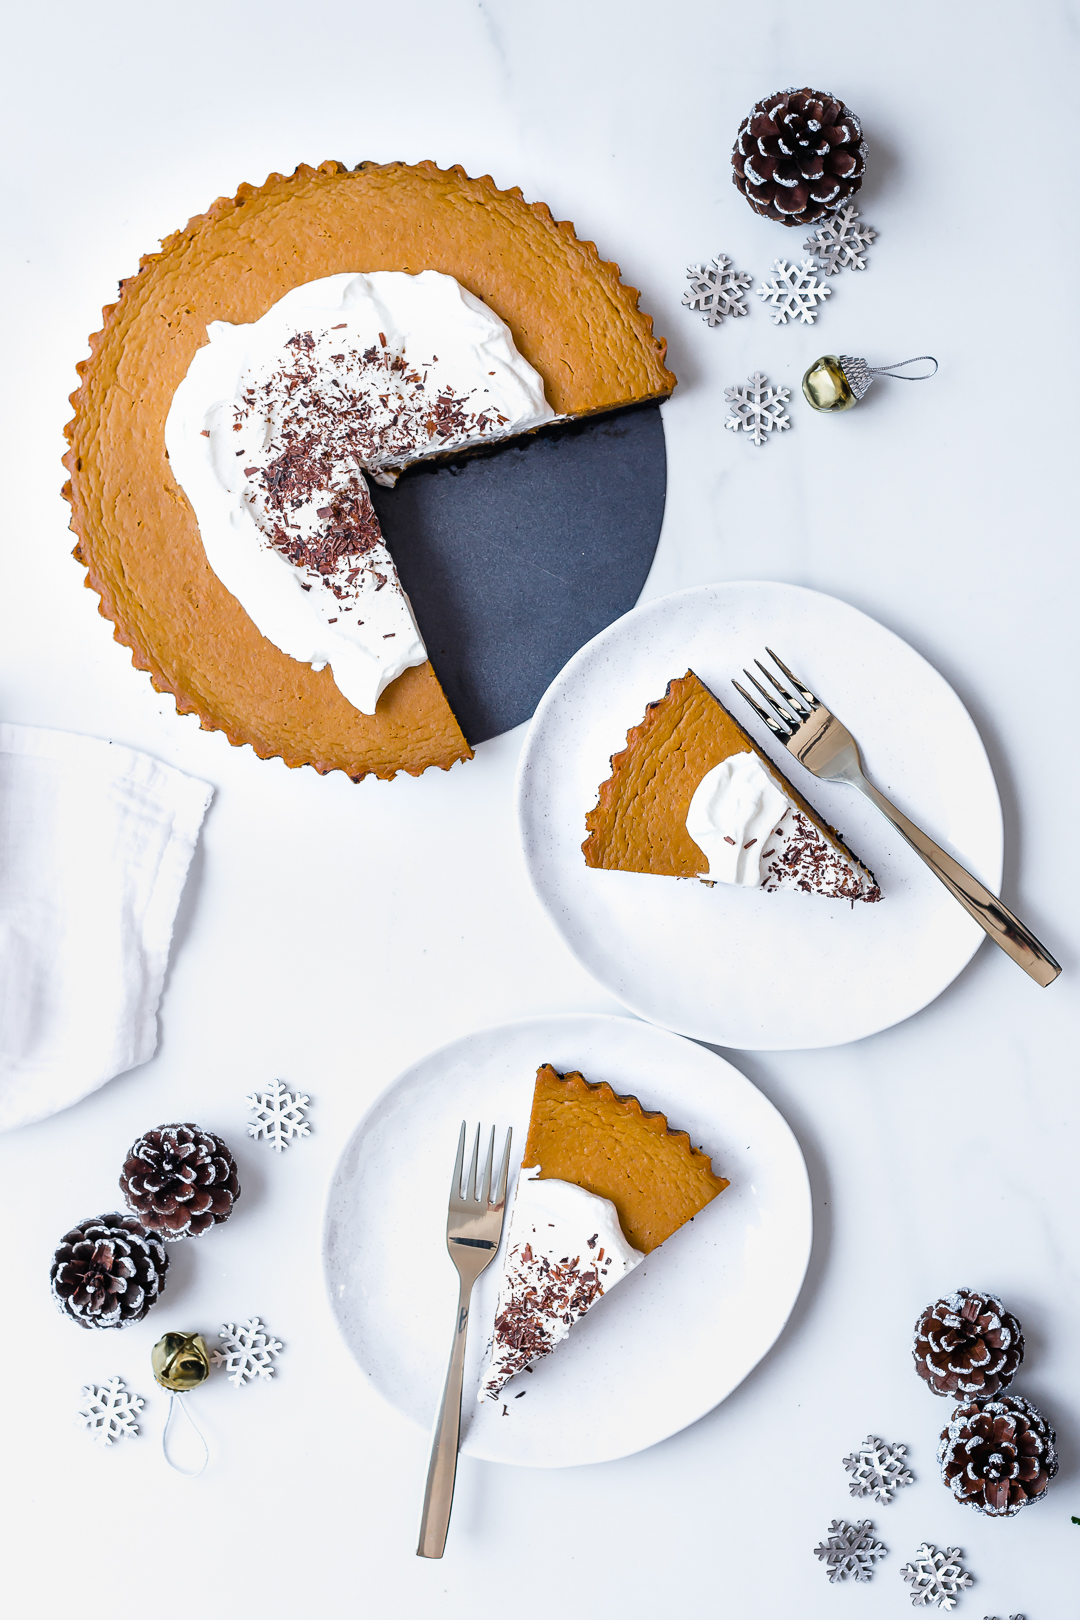 Overhead shot of Pumpkin Pie with slices served onto plates